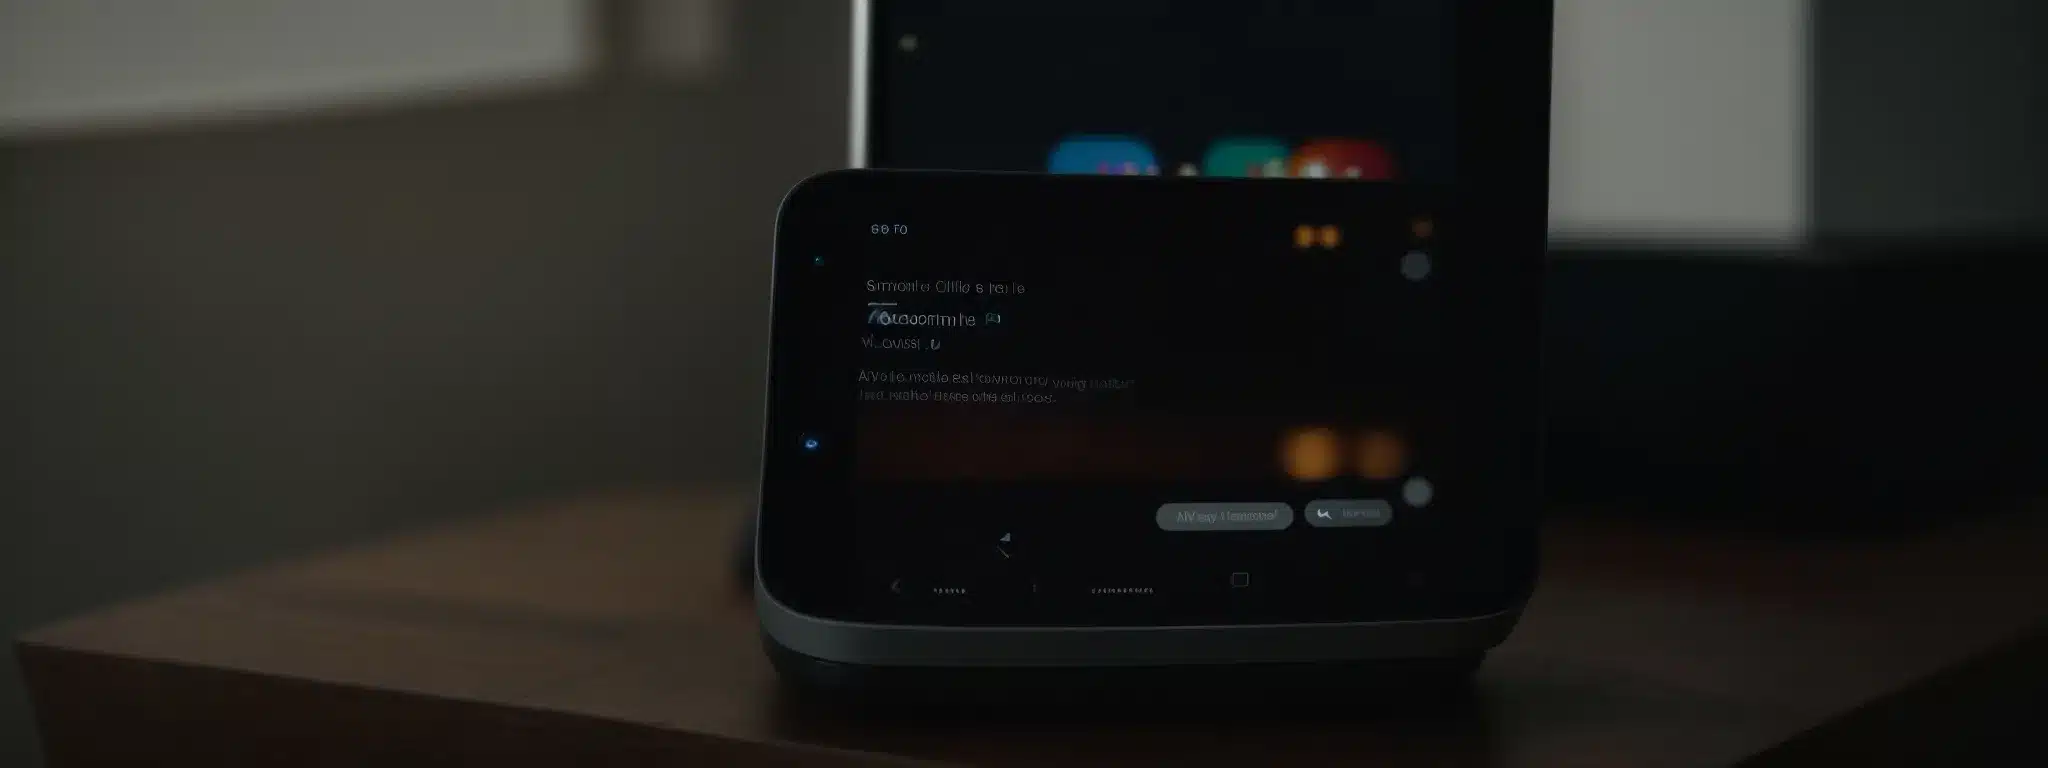 A Smartphone Displaying A Search Interface Rests On A Table Next To A Smart Speaker.